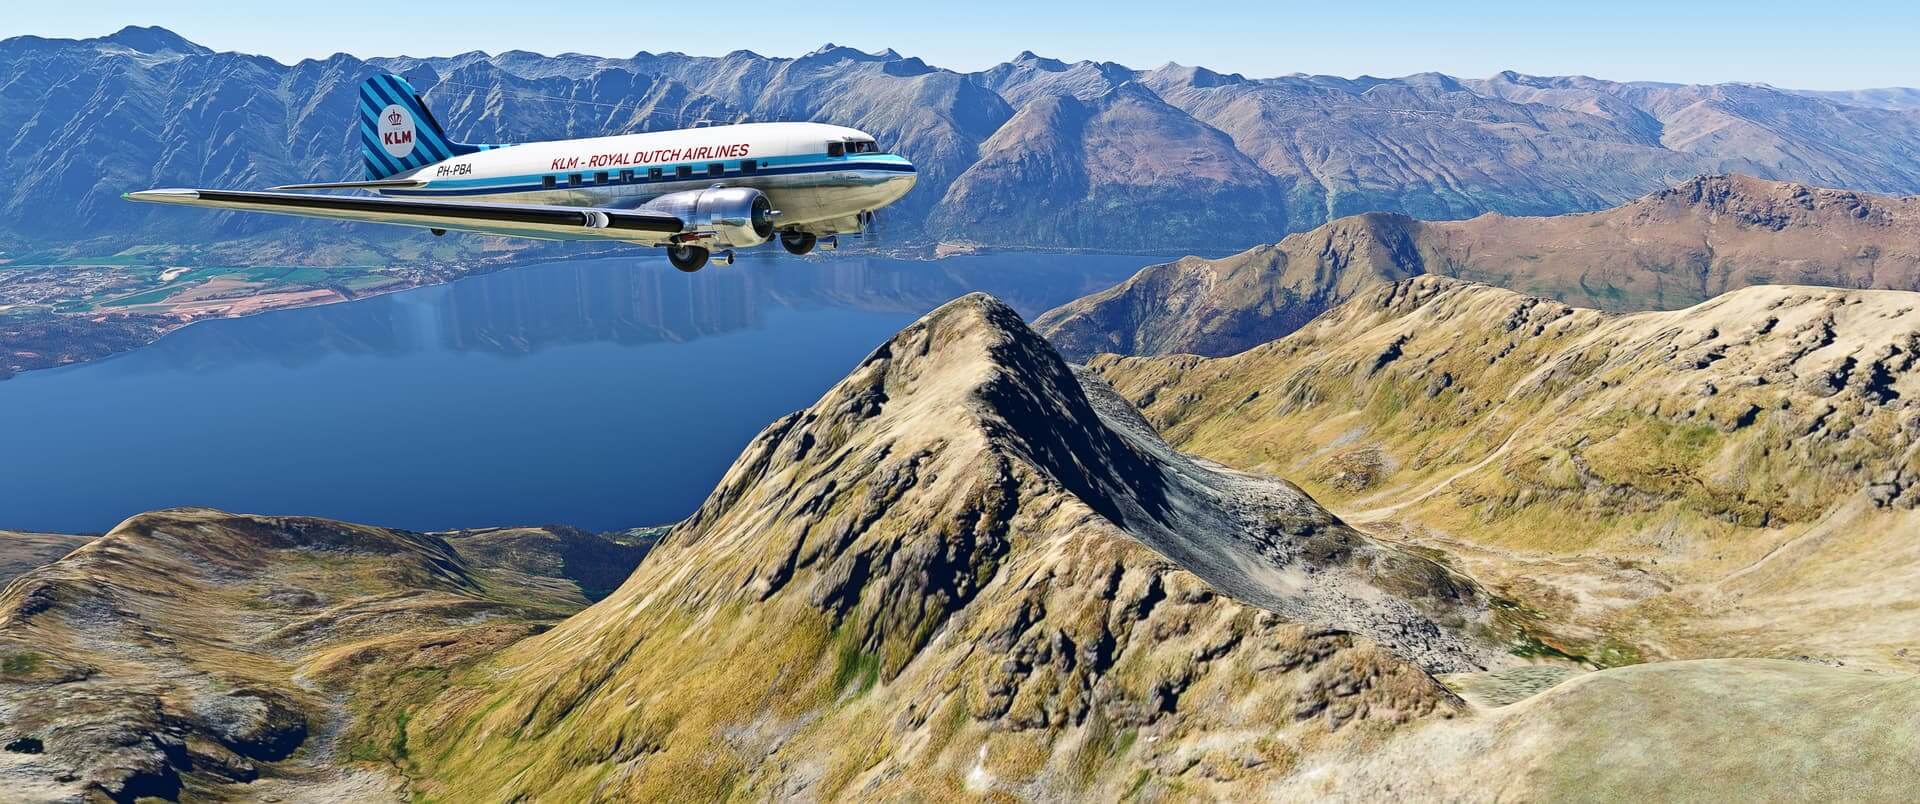 A KLM Royal Dutch Airlines DC-3 flies level over the top of undulating terrain, with a large lake visible behind the aircraft